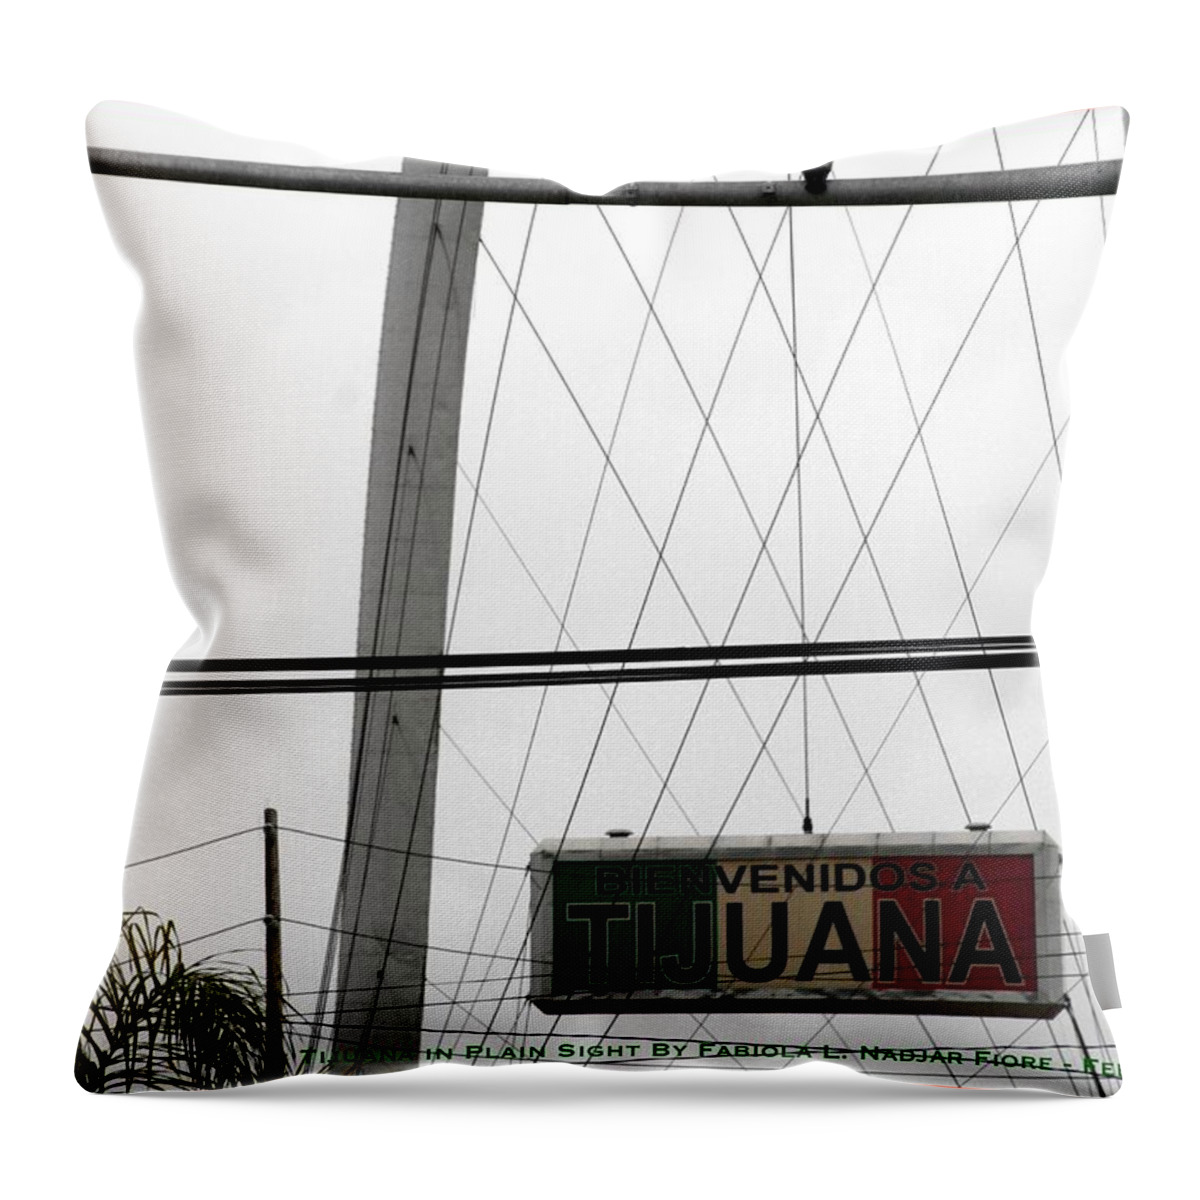 Photography Throw Pillow featuring the photograph Tijuana in Plain Sight by Fabiola L Nadjar Fiore